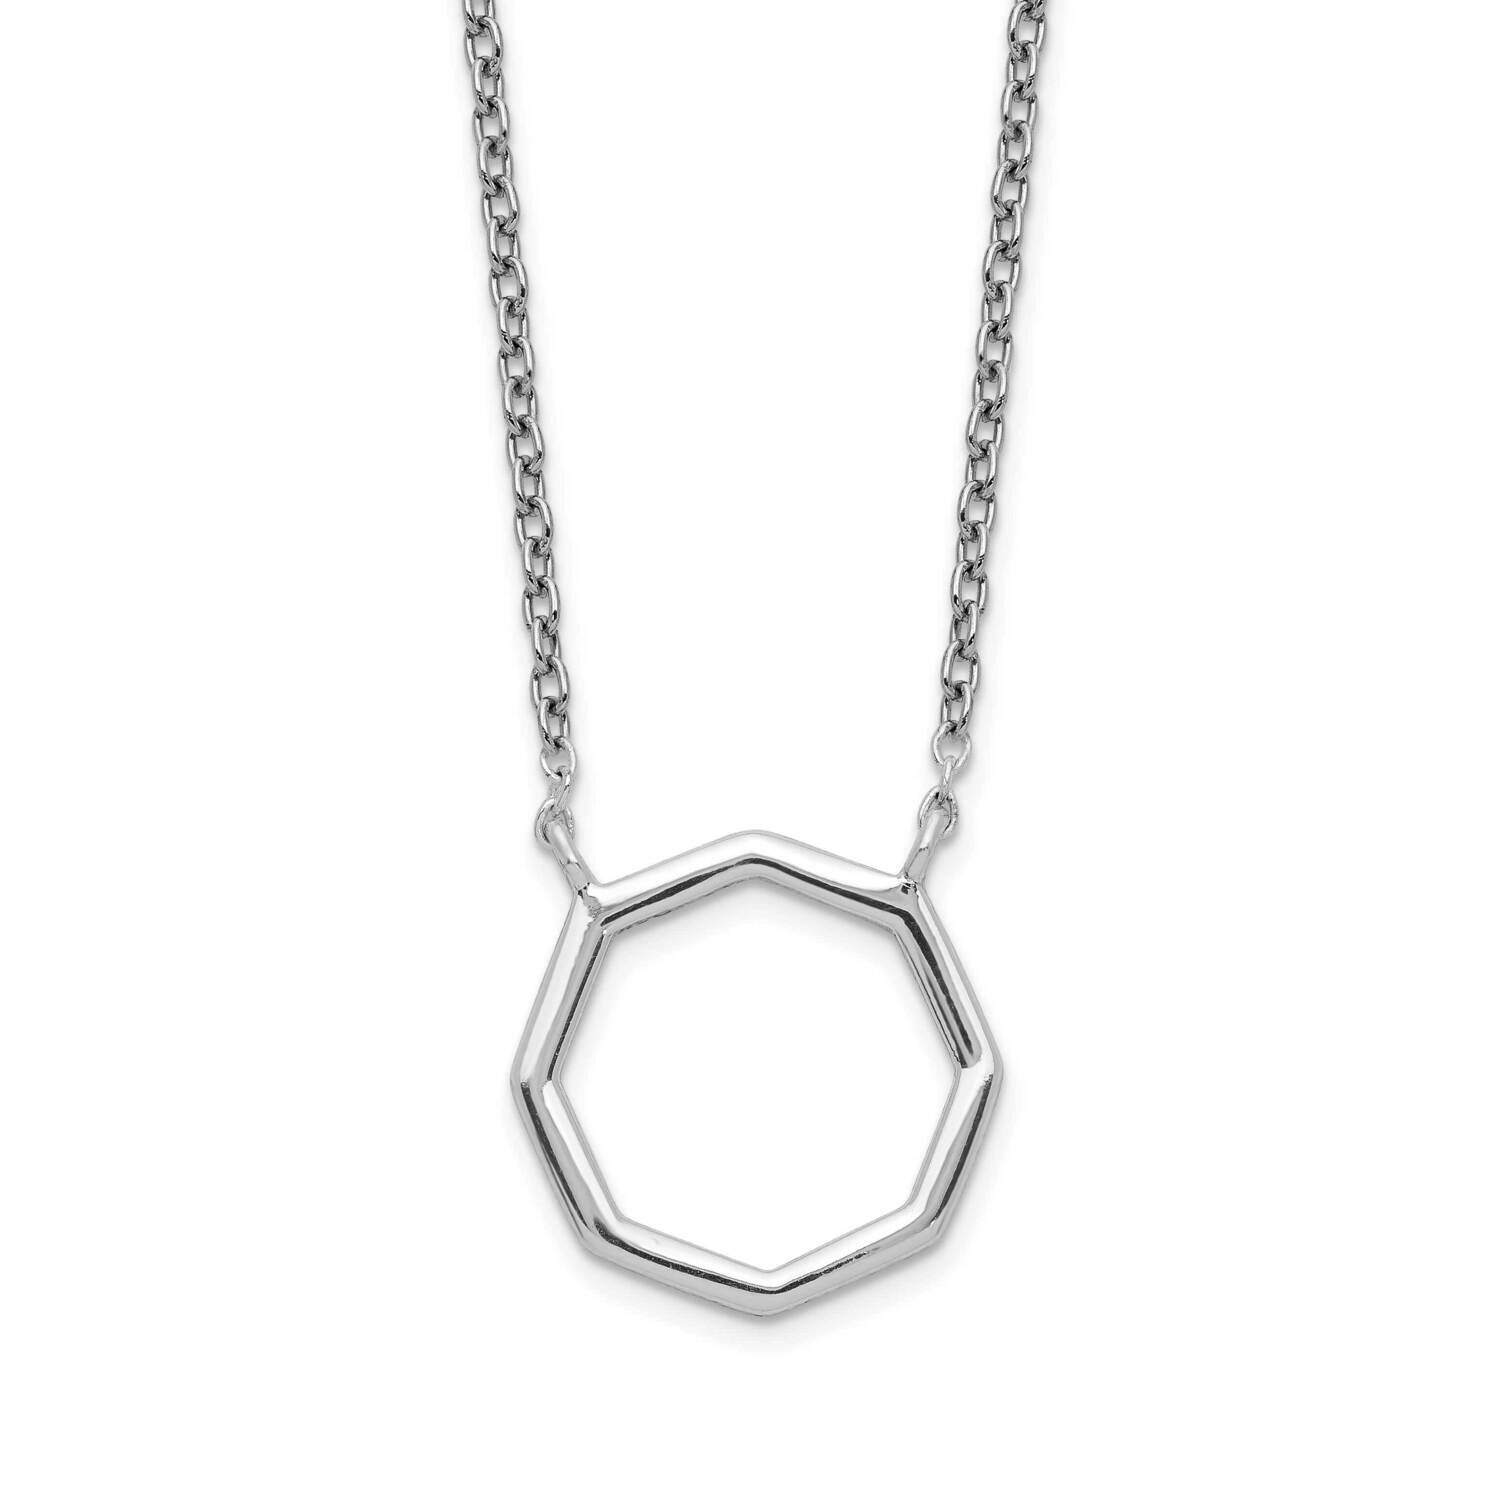 Polished Octagon Necklace Sterling Silver QG5195-16